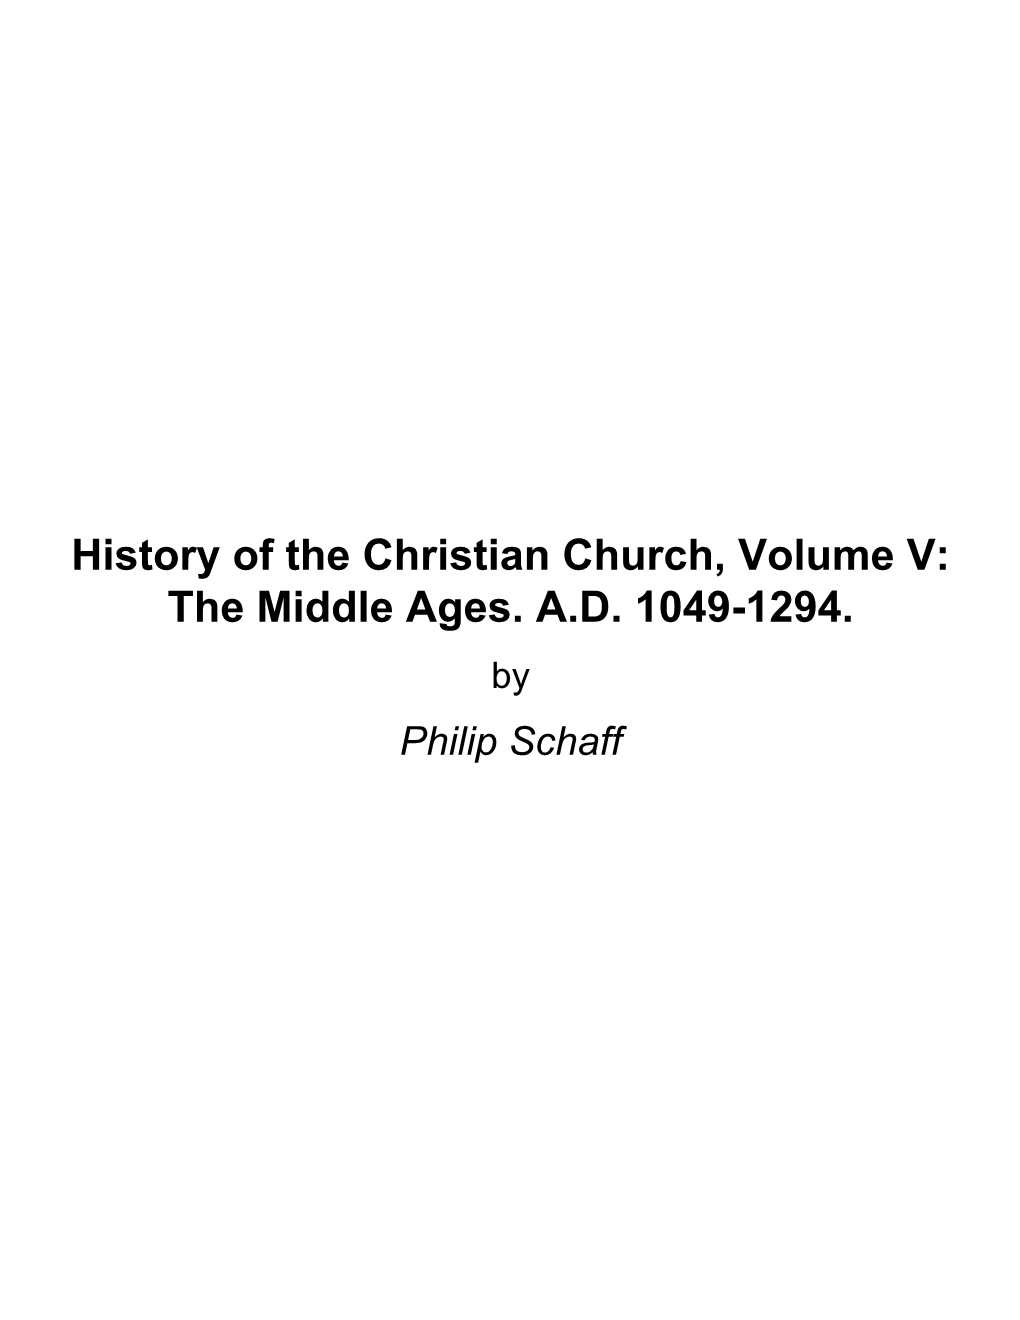 History of the Christian Church, Volume V: the Middle Ages. A.D. 1049-1294